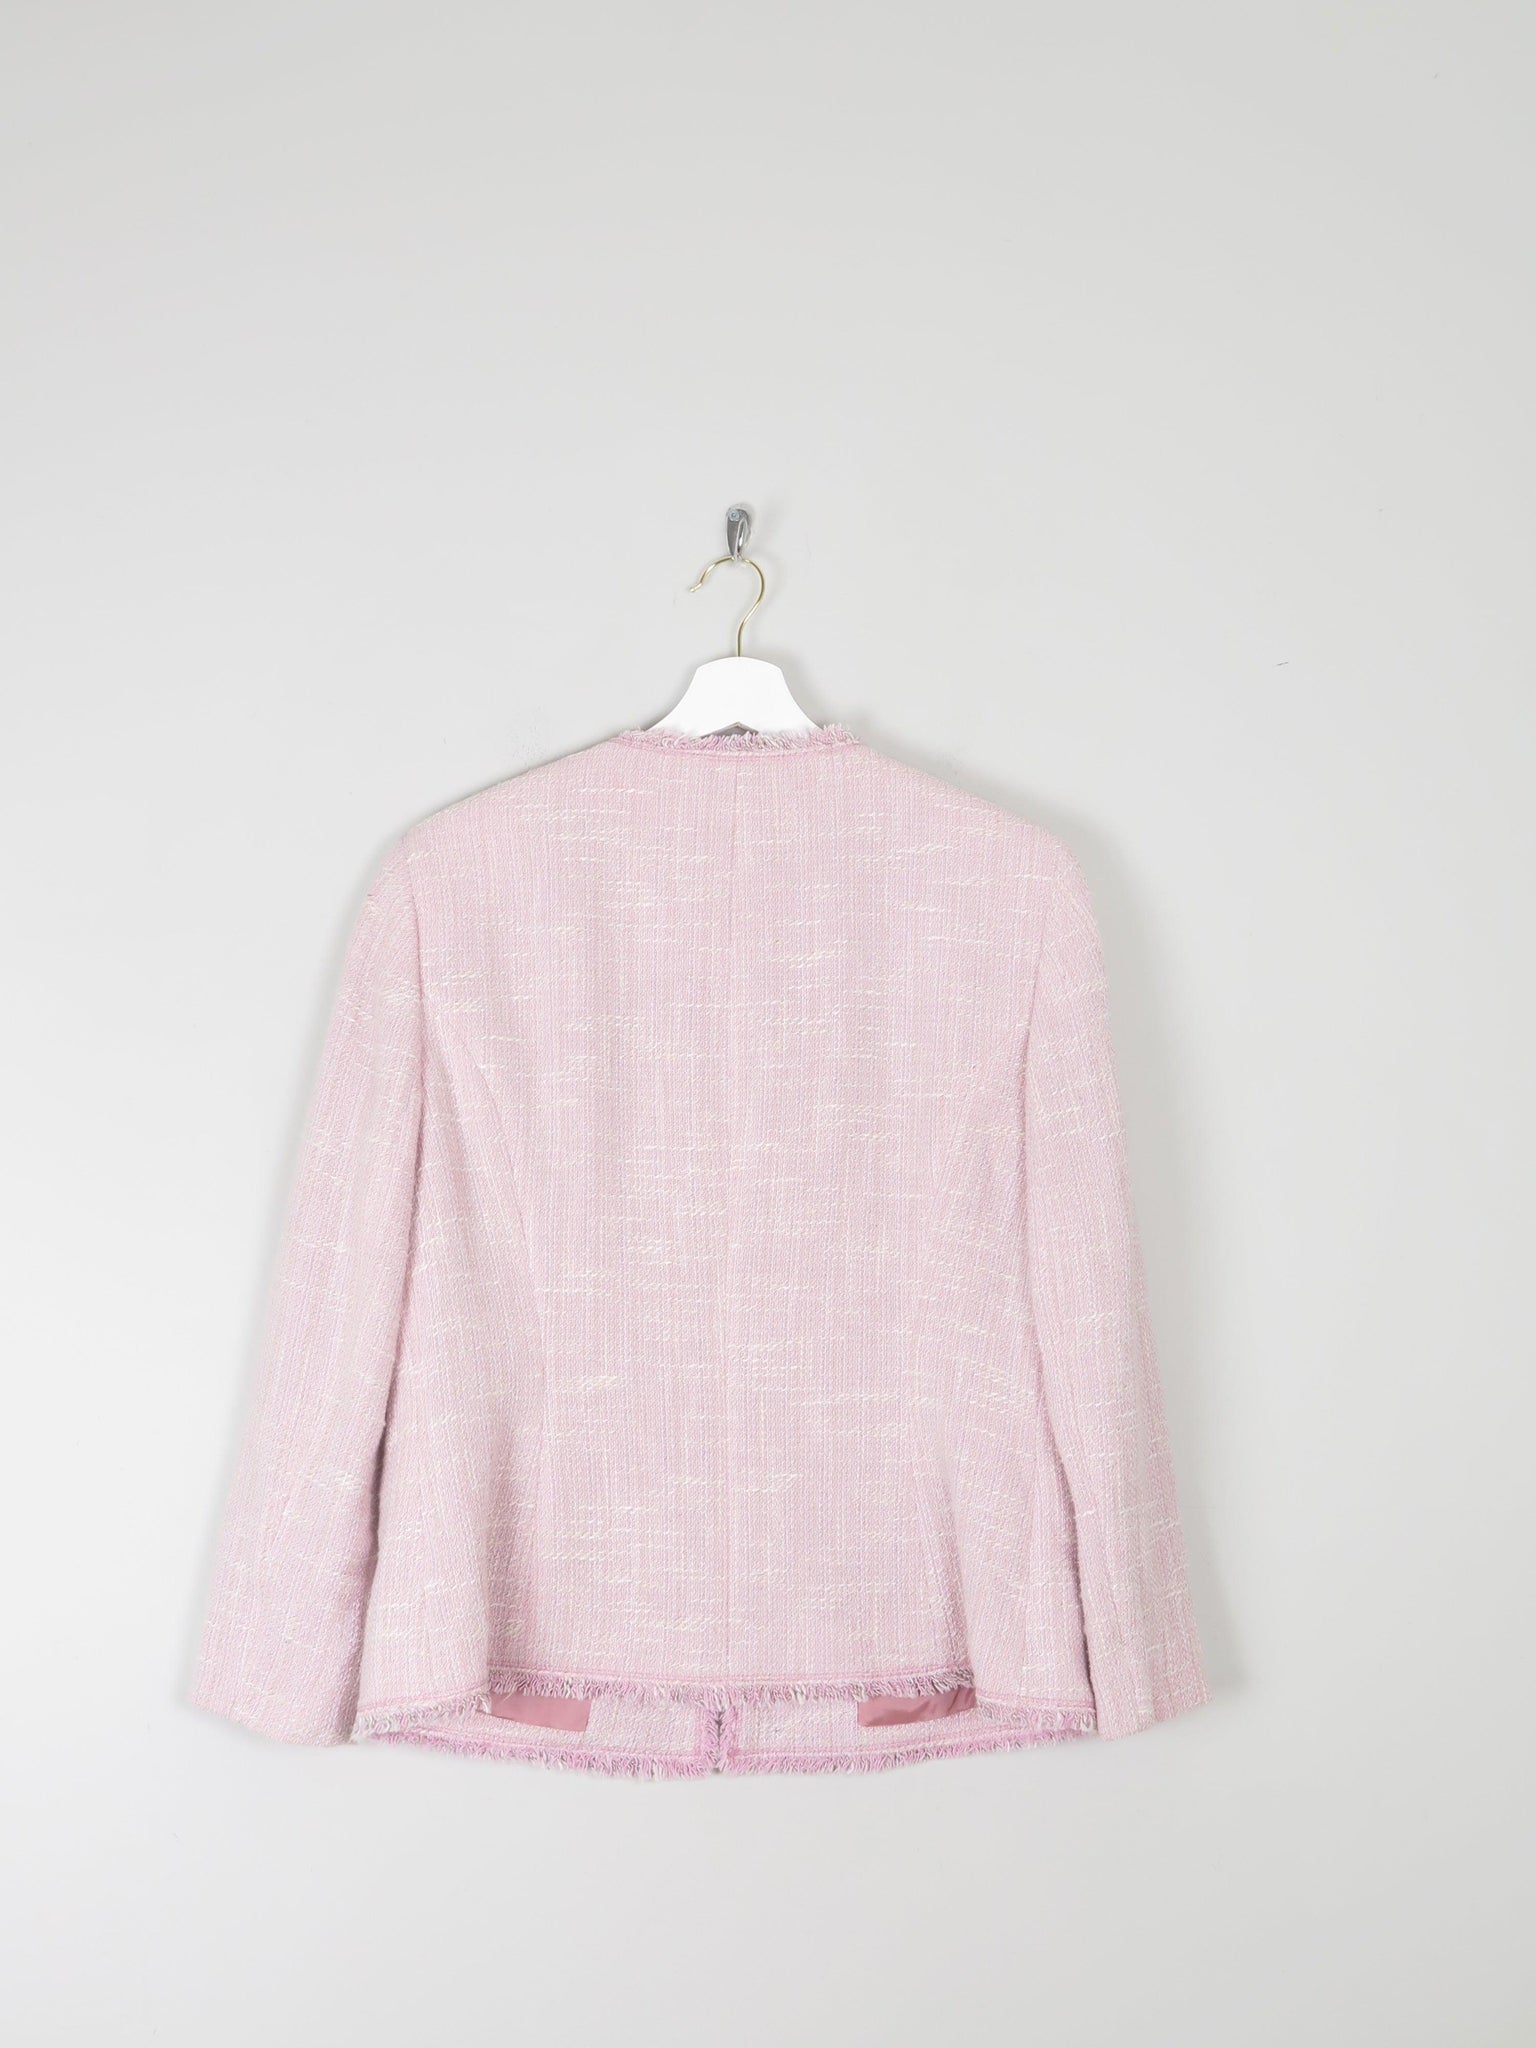 Women's Pink Tweed Classic Betty Barclay Jacket  M - The Harlequin